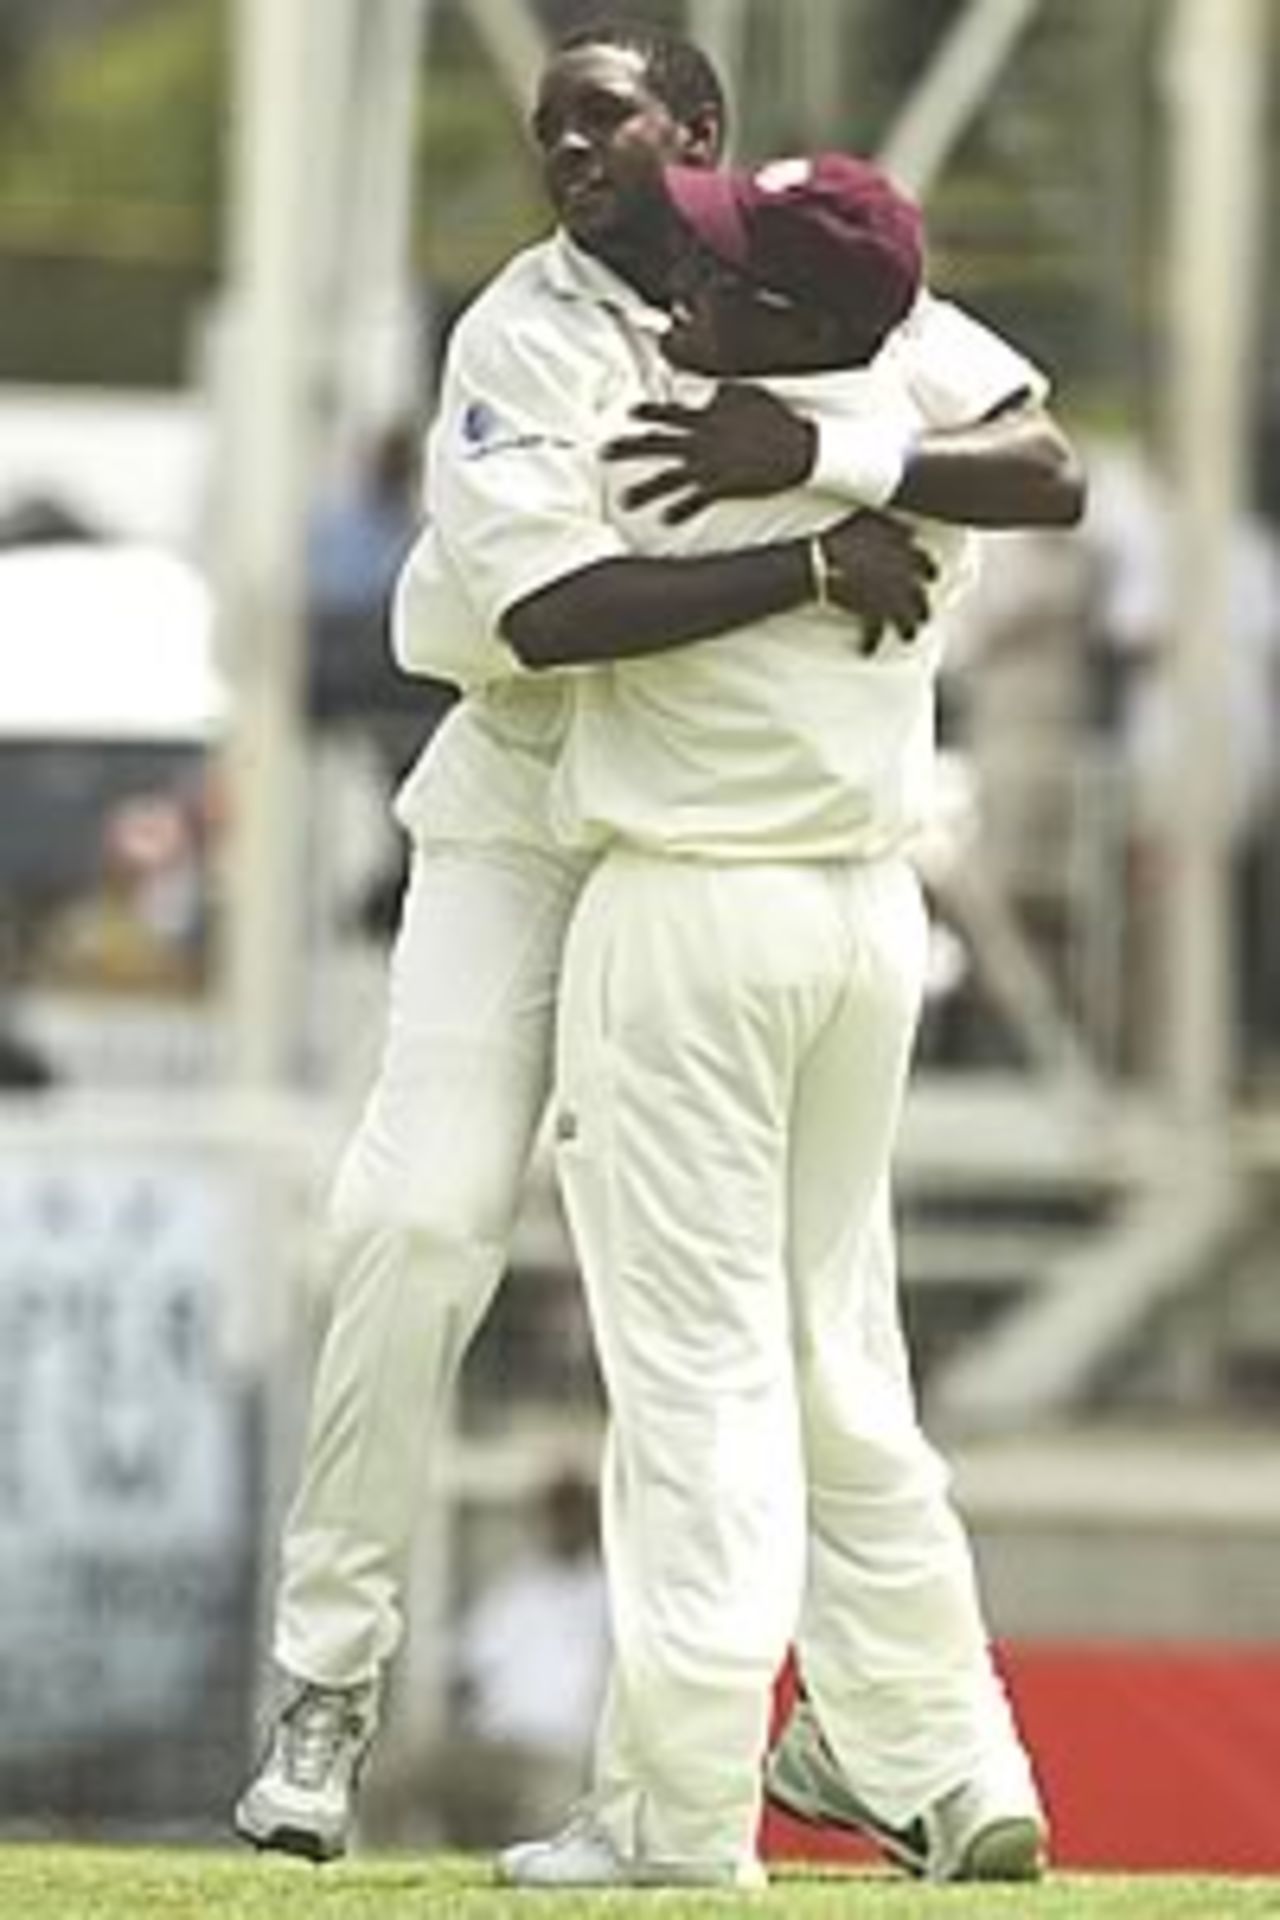 ST JOHN'S - MAY 9: Jermaine Lawson and Brian Lara of the West Indies celebrate the wicket of Matthew Hayden of Australia during day one of the fourth test between the West Indies and Australia on May 9, 2003 played at the Recreation Oval, St John's, Antigua.